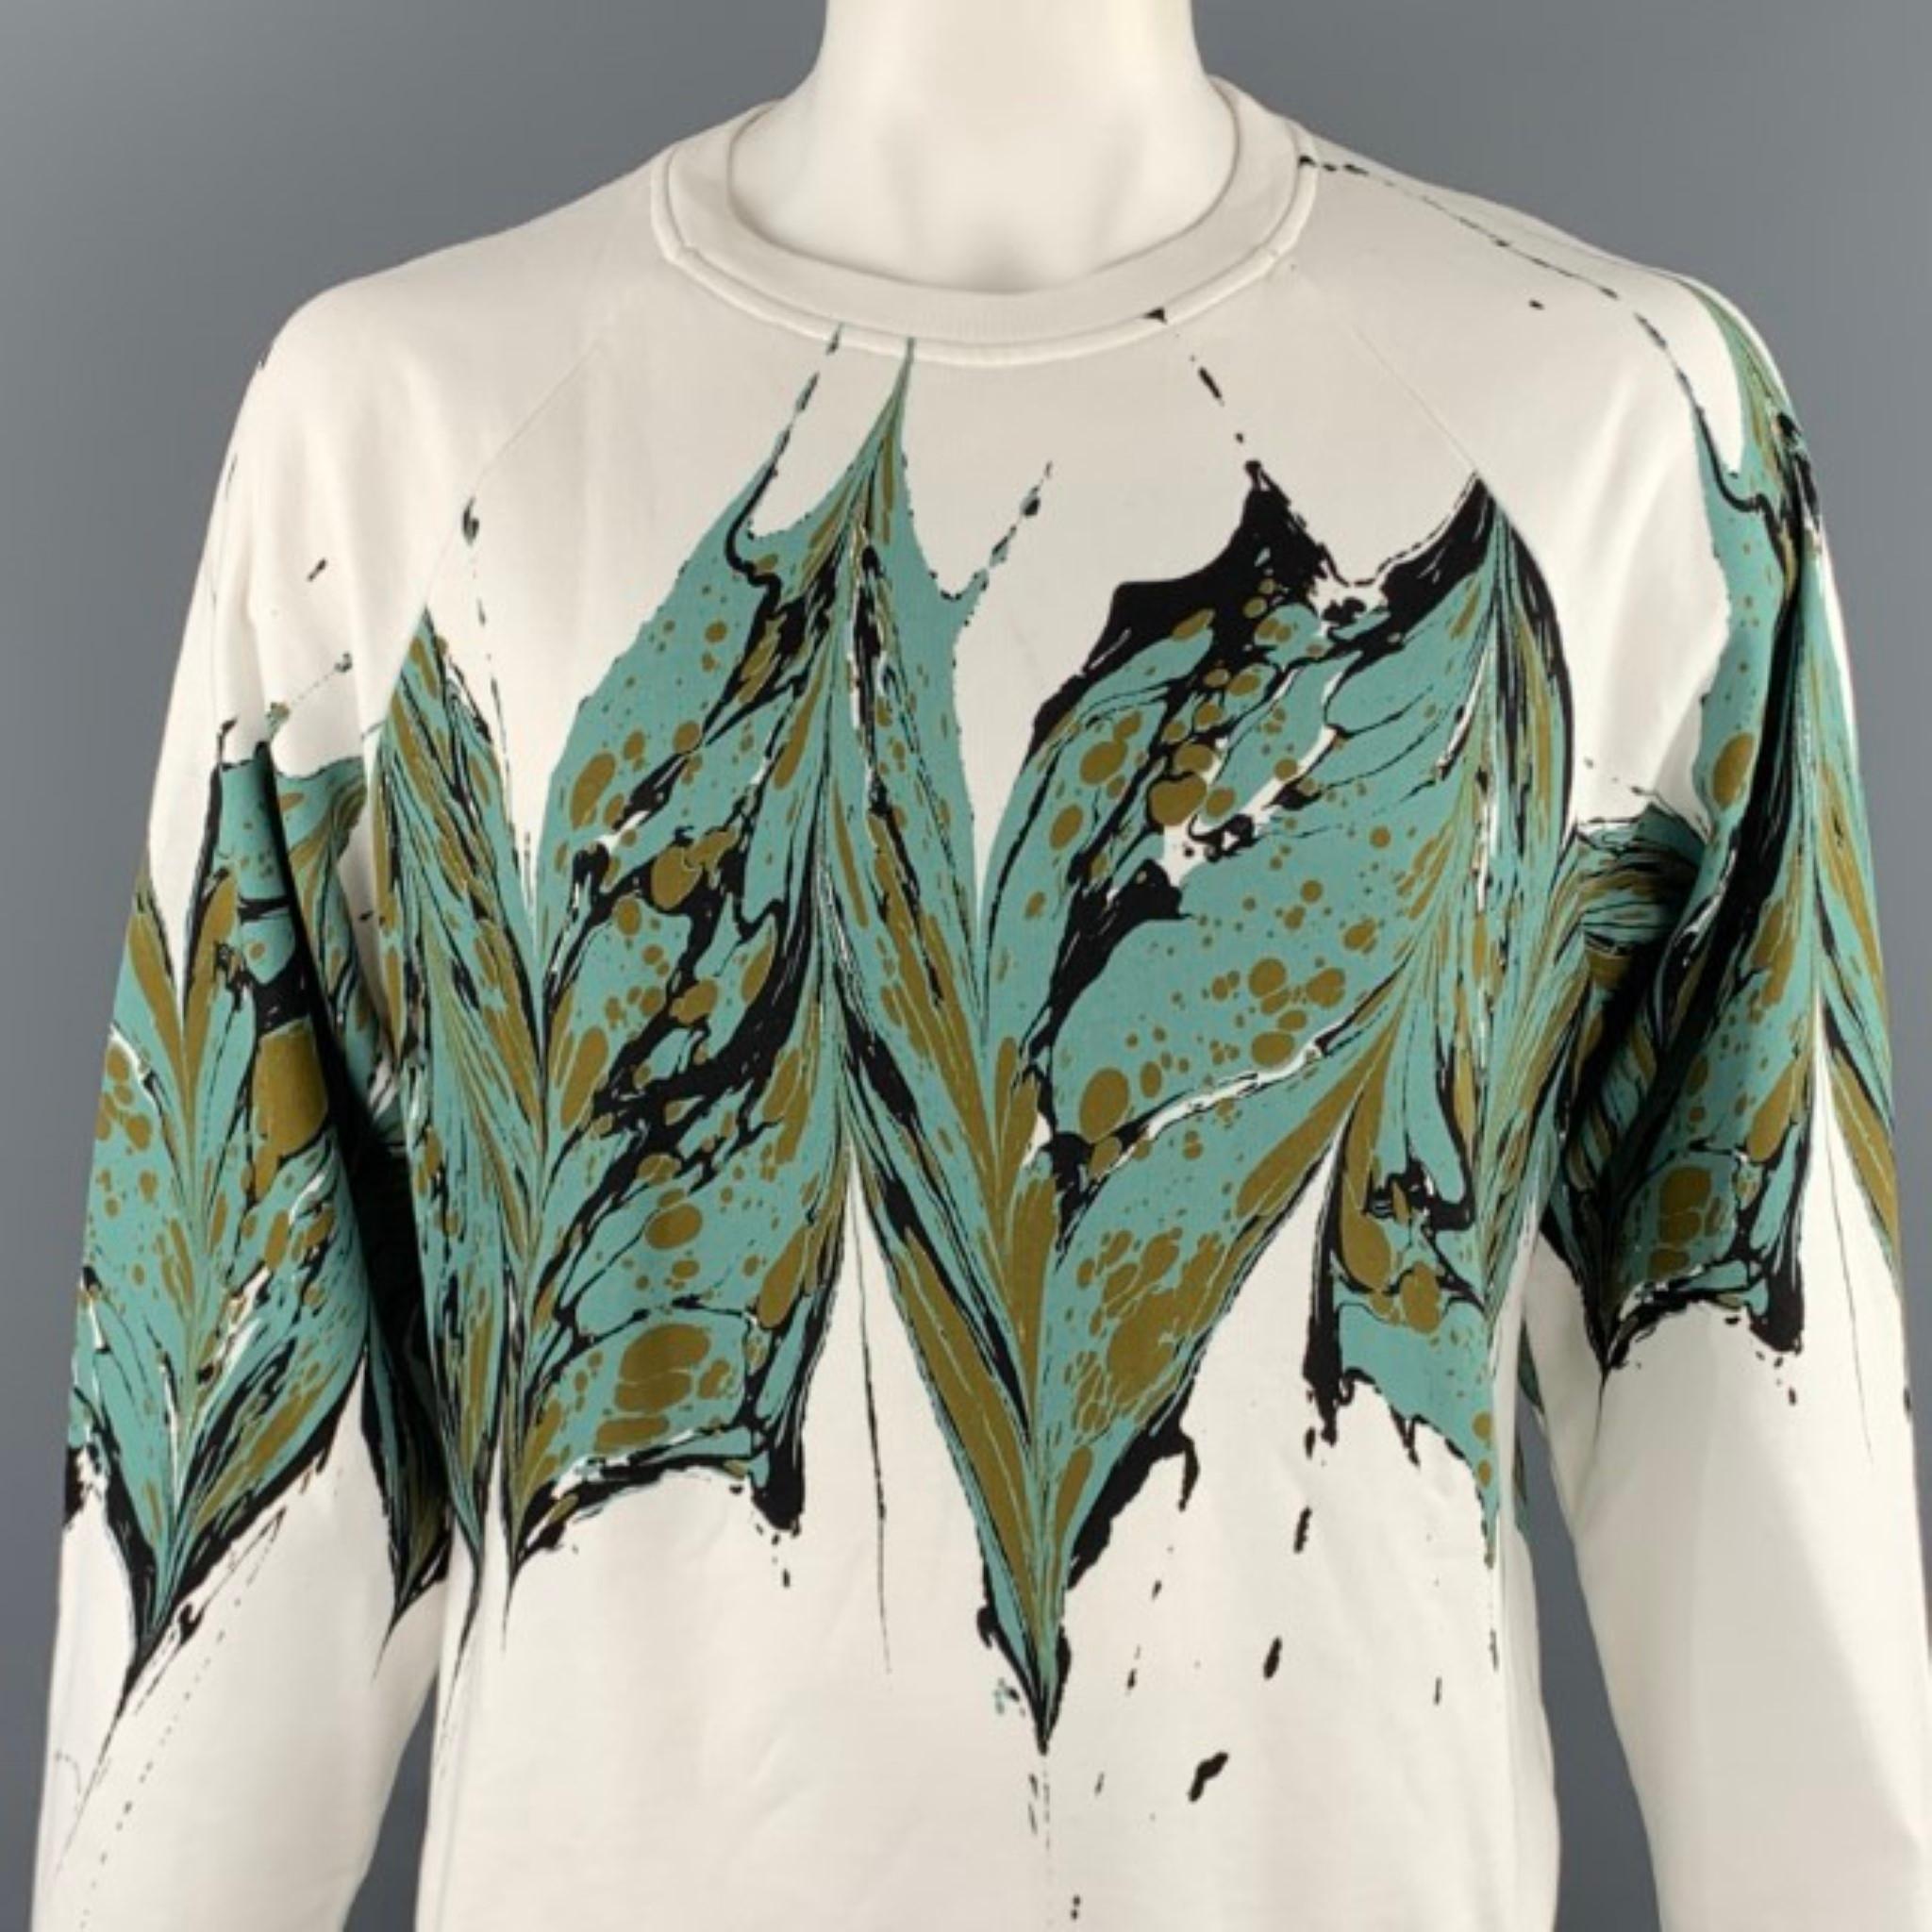 DRIES VAN NOTEN F/W 18 sweatshirt comes in a white cotton with a ebru mable print featuring a raglan sleeves and a crew-neck.

Excellent Pre-Owned Condition.
Marked: L

Measurements:

Shoulder: 17 in. 
Chest: 43 in. 
Sleeve: 28 in. 
Length: 26 in. 